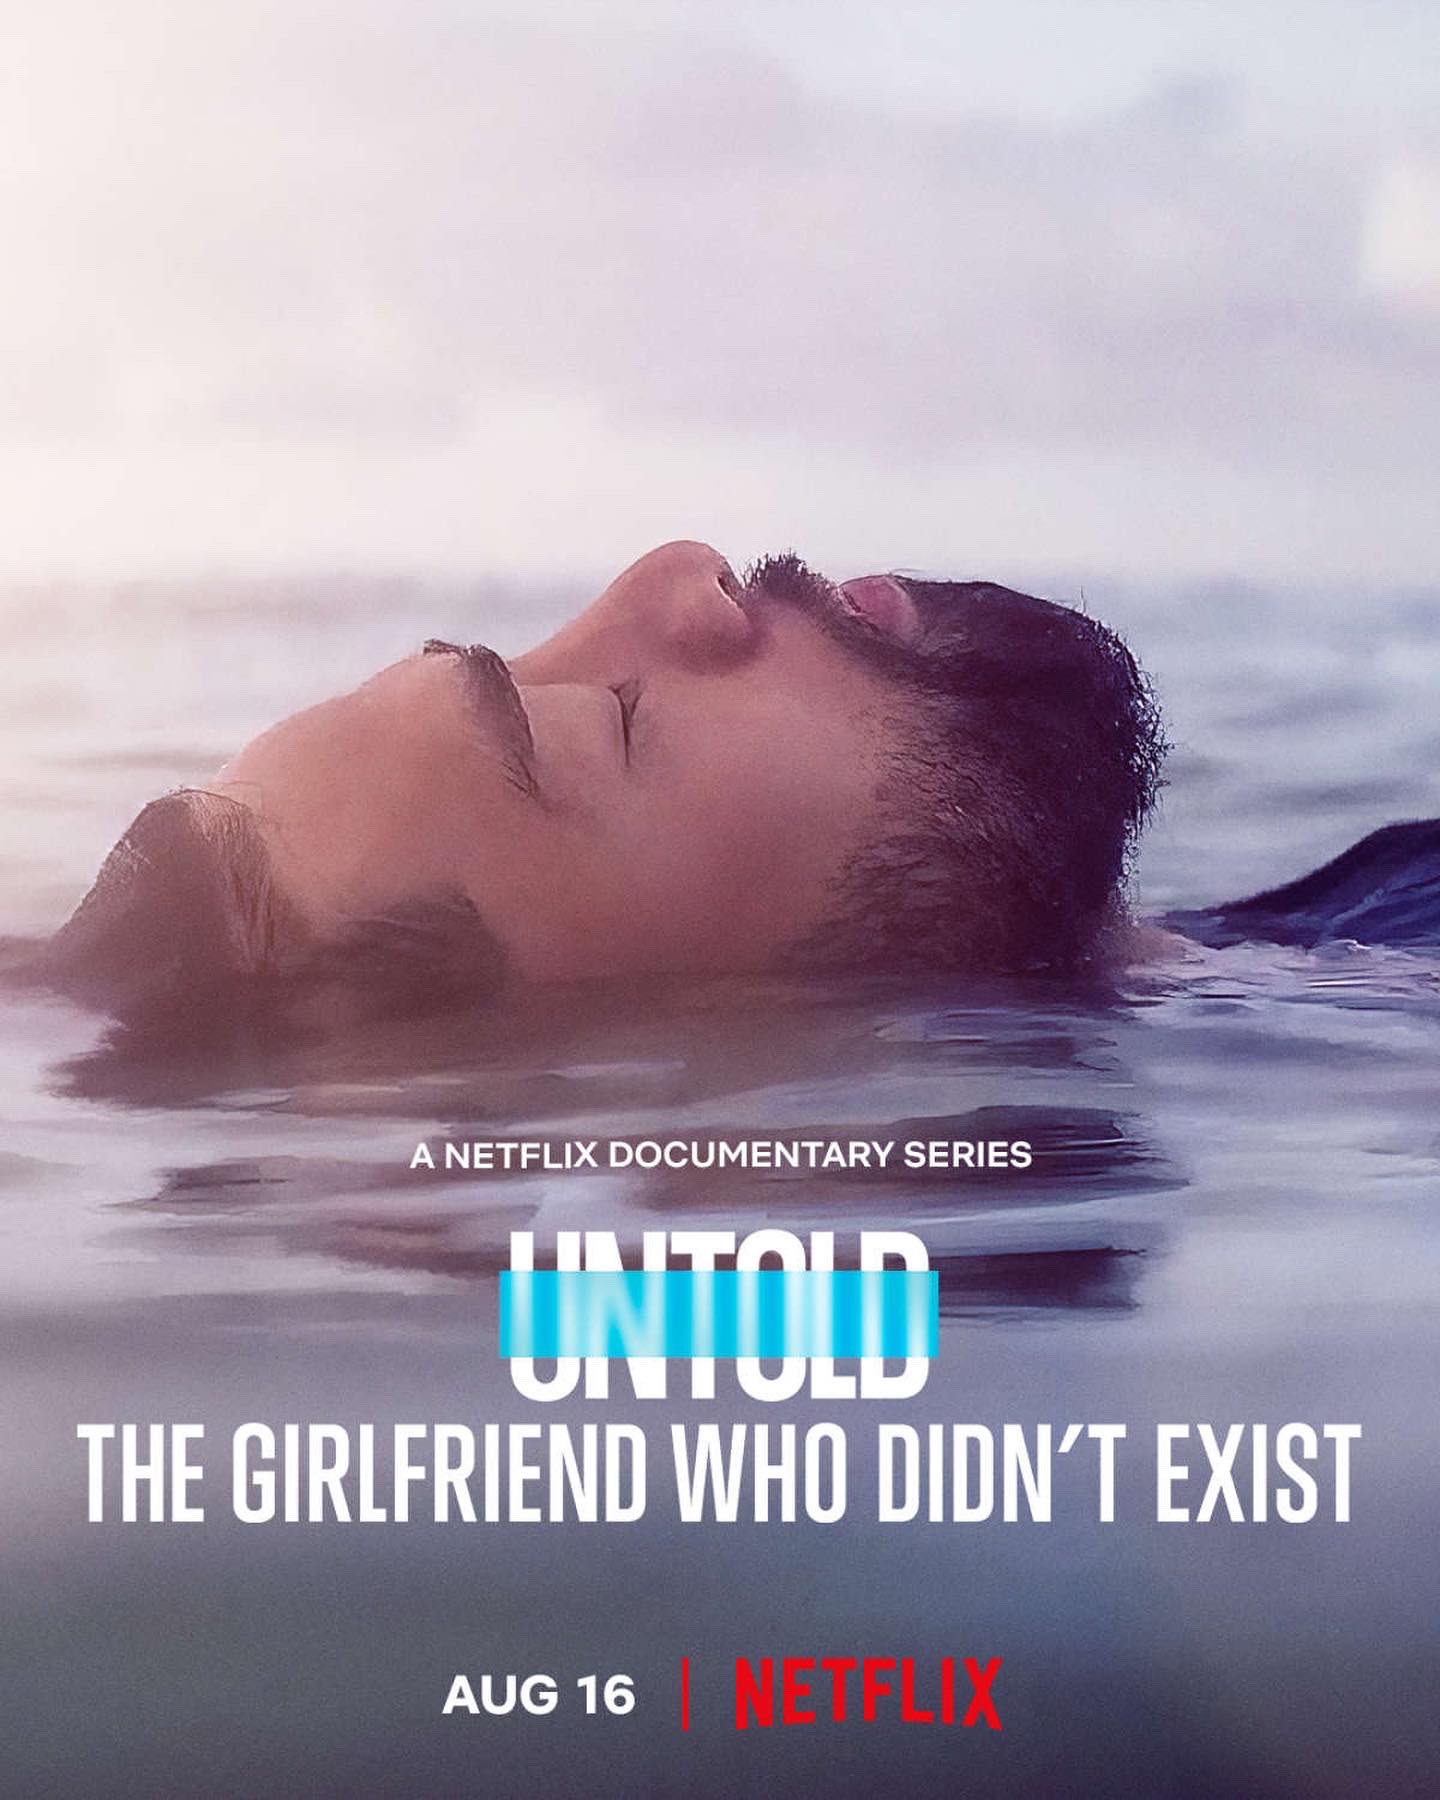 Is Untold The Girlfriend Who Didn’t Exist (2022) available on Netflix